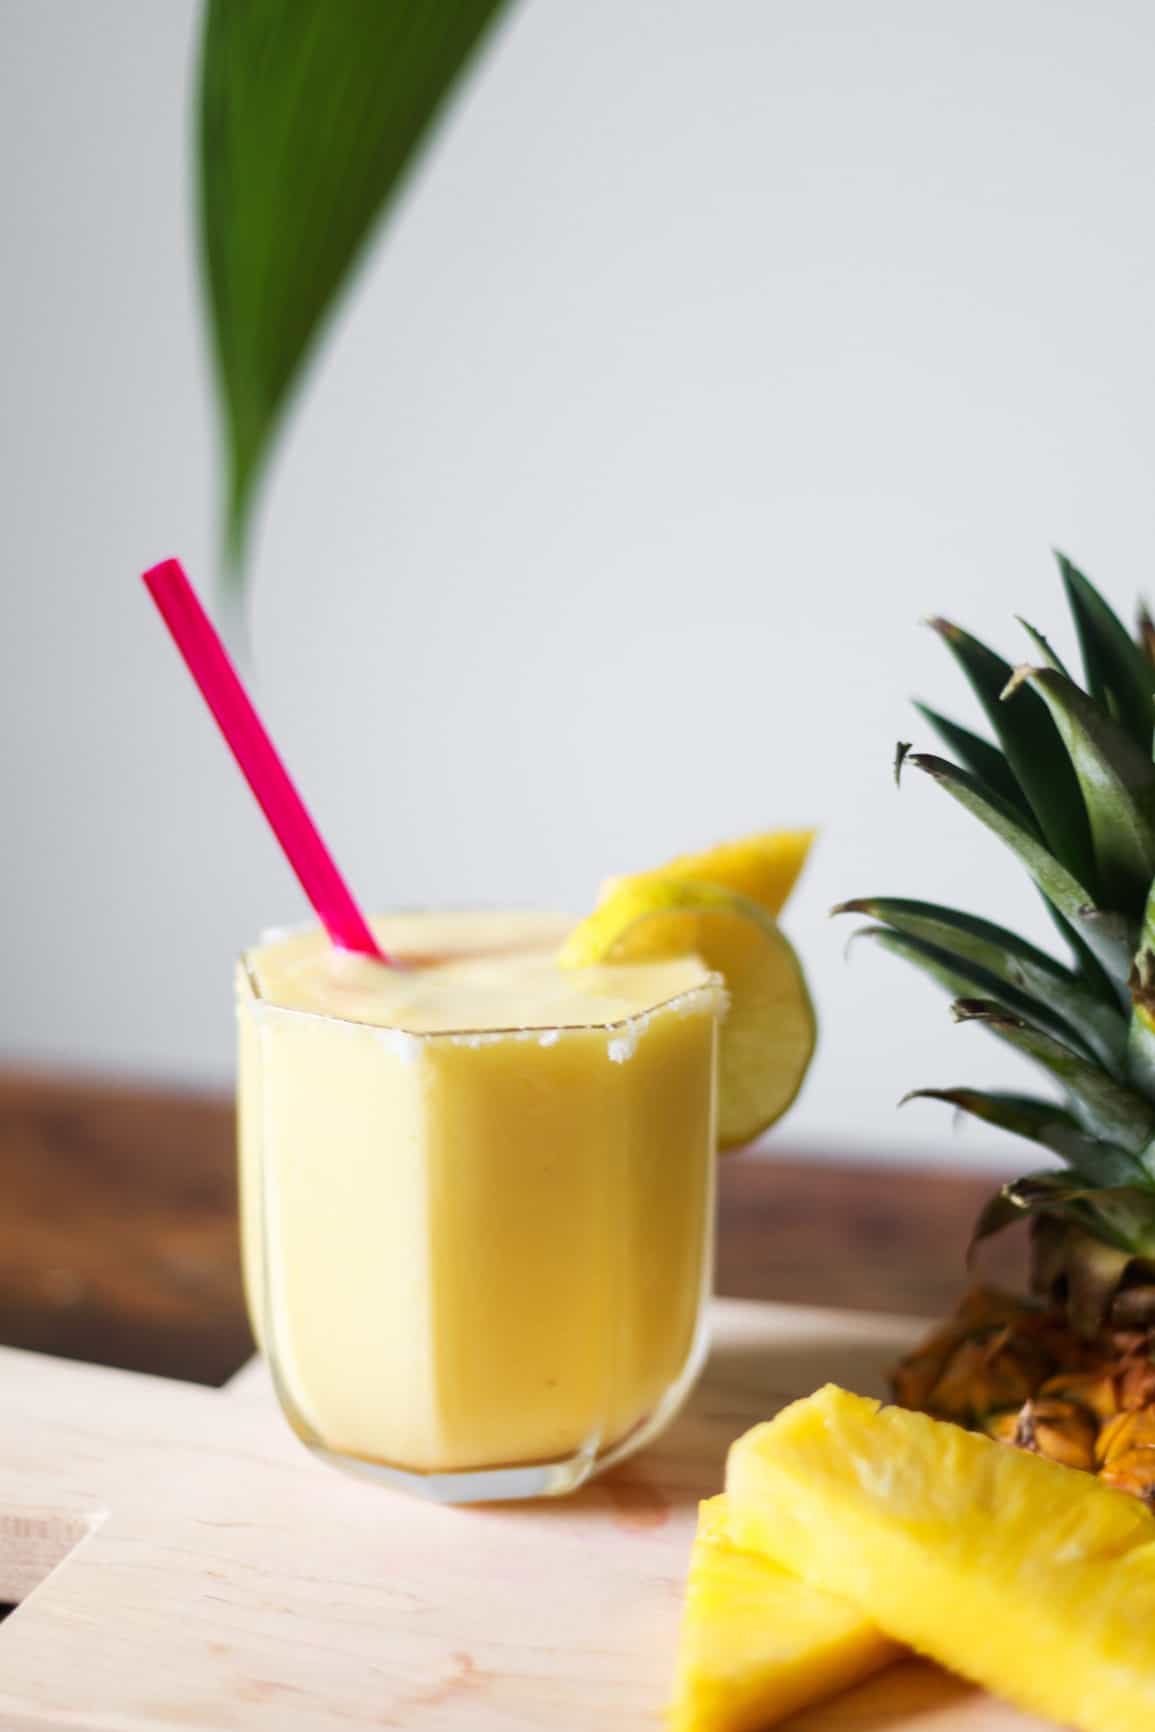 Looking for a new summer cocktail to try that's easy to make? This fresh pineapple margarita recipe blends together fresh pineapple, tequila, orange liqueur, ice, and lime juice. Read here for the step-by-step instructions!